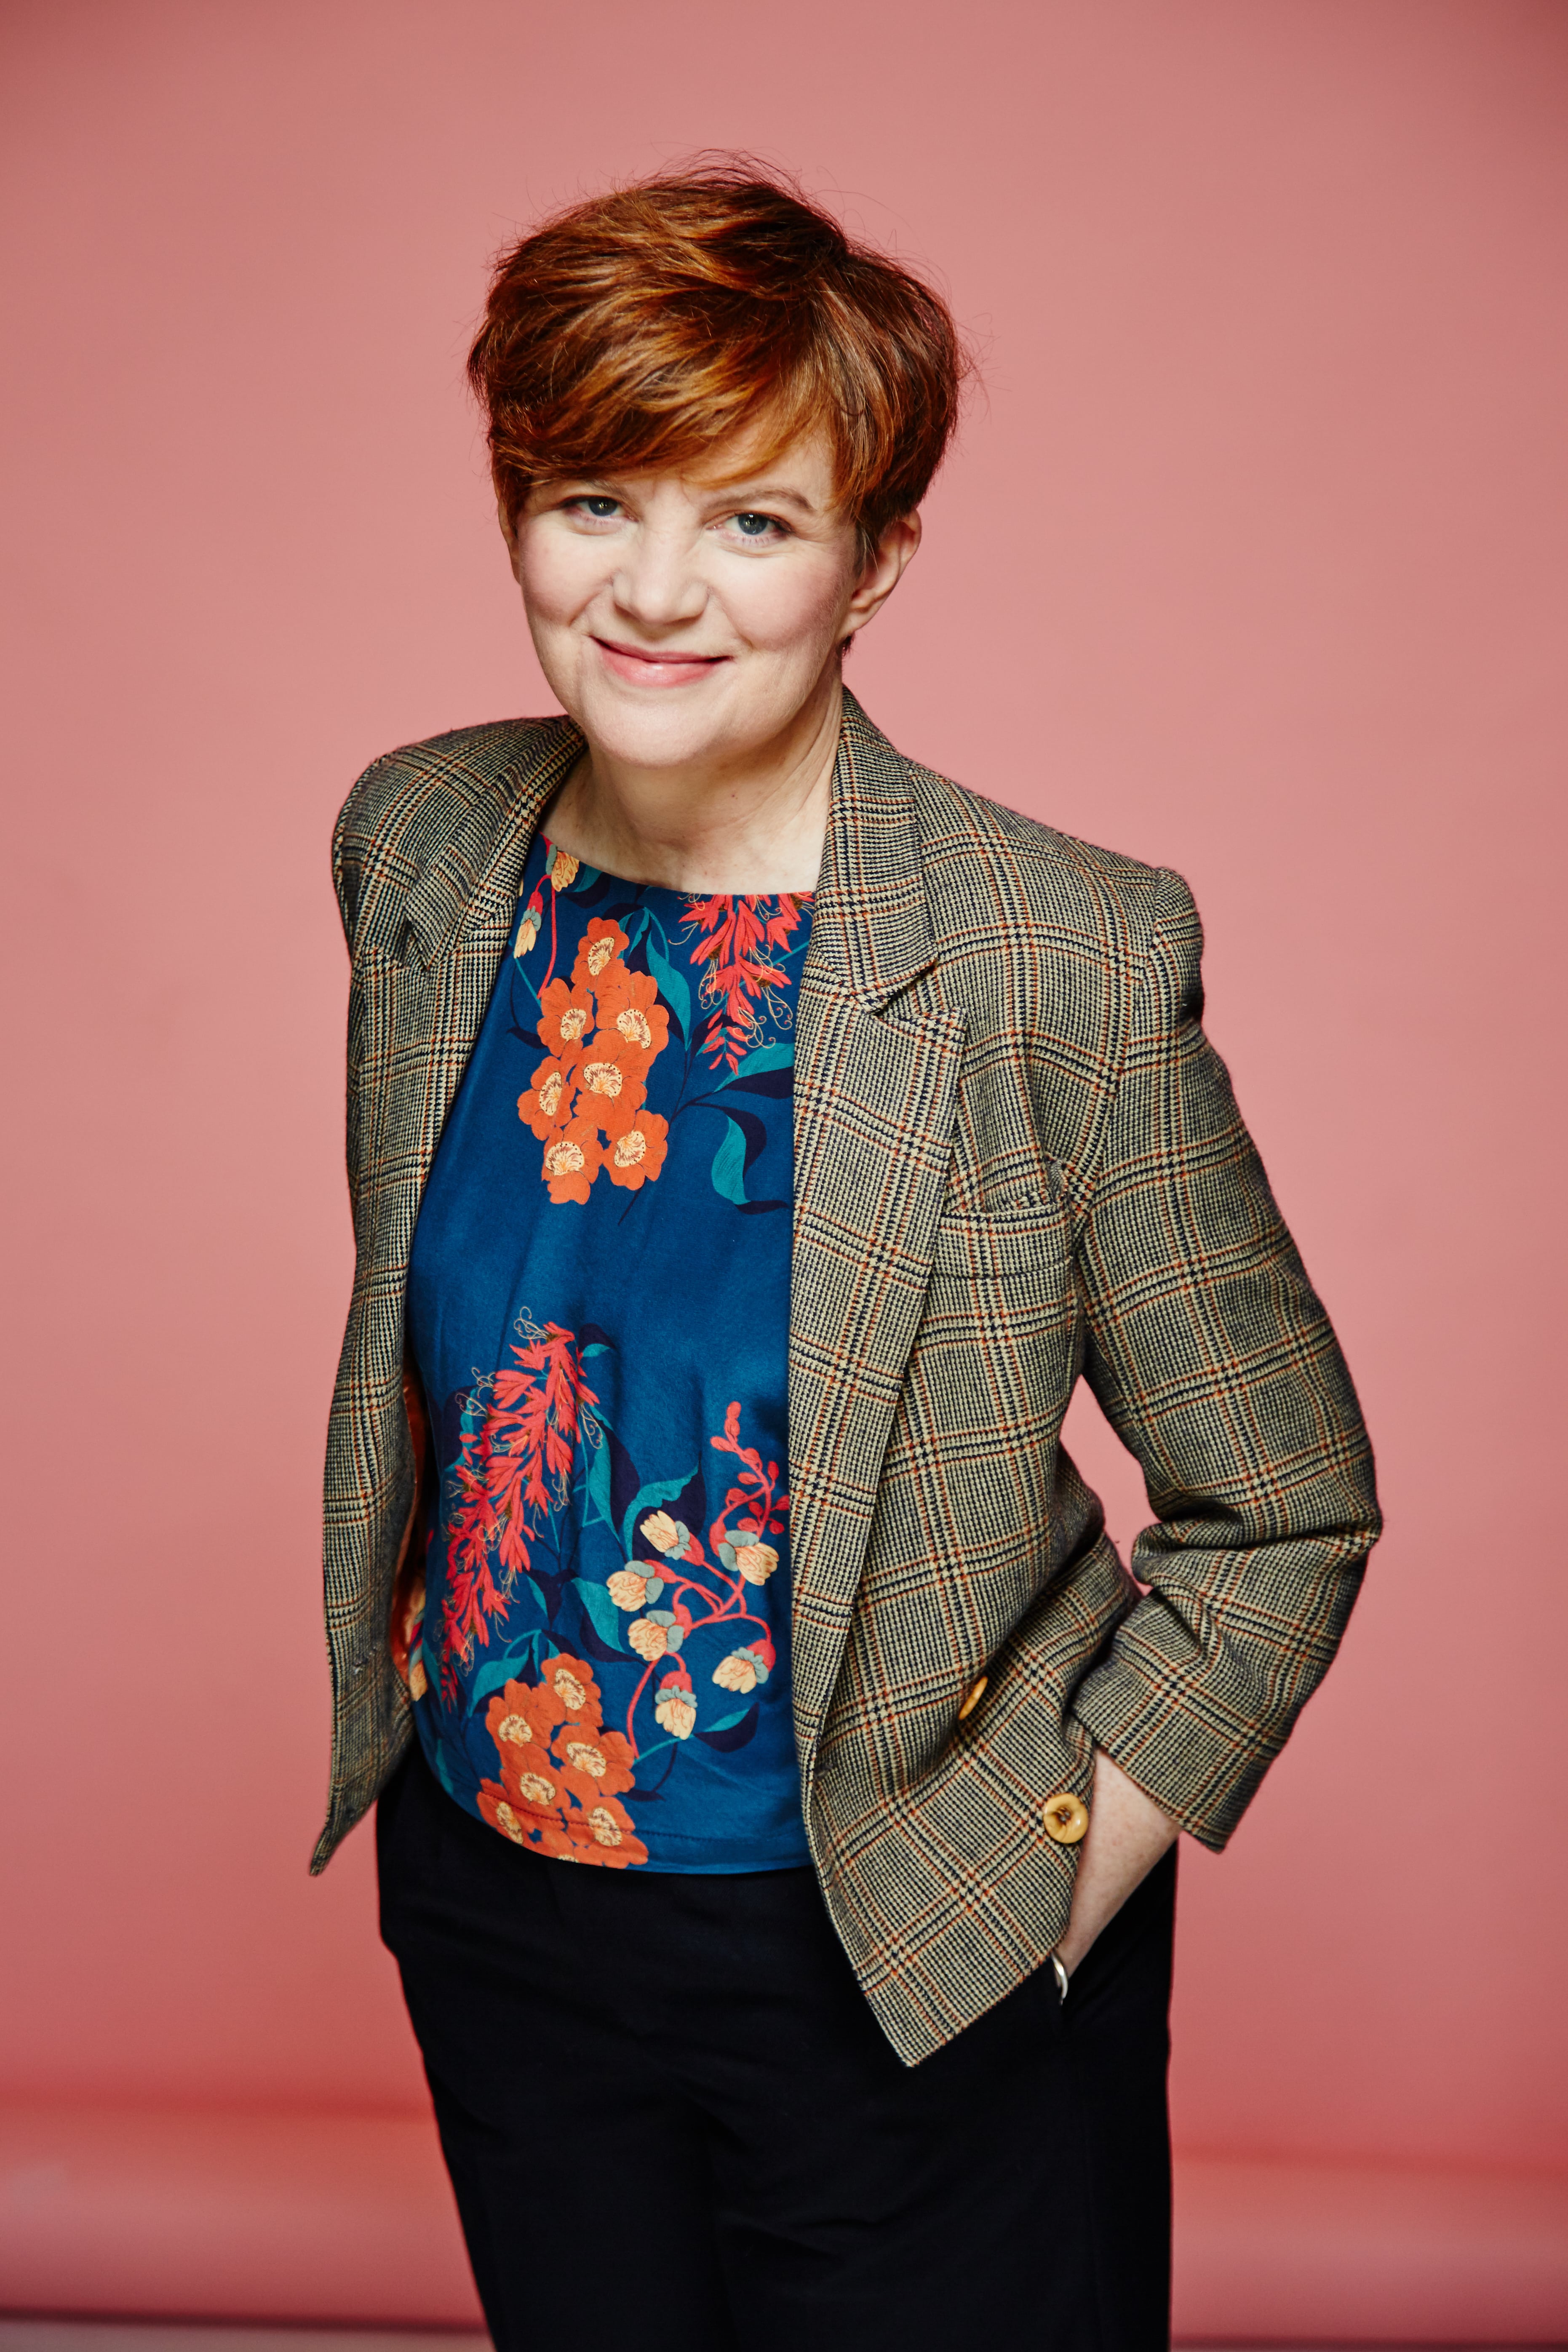 A short-cut redhead woman wearing a floral blue and orange shirt, with a grey blazer on top, hands in her pockets, on a pink background